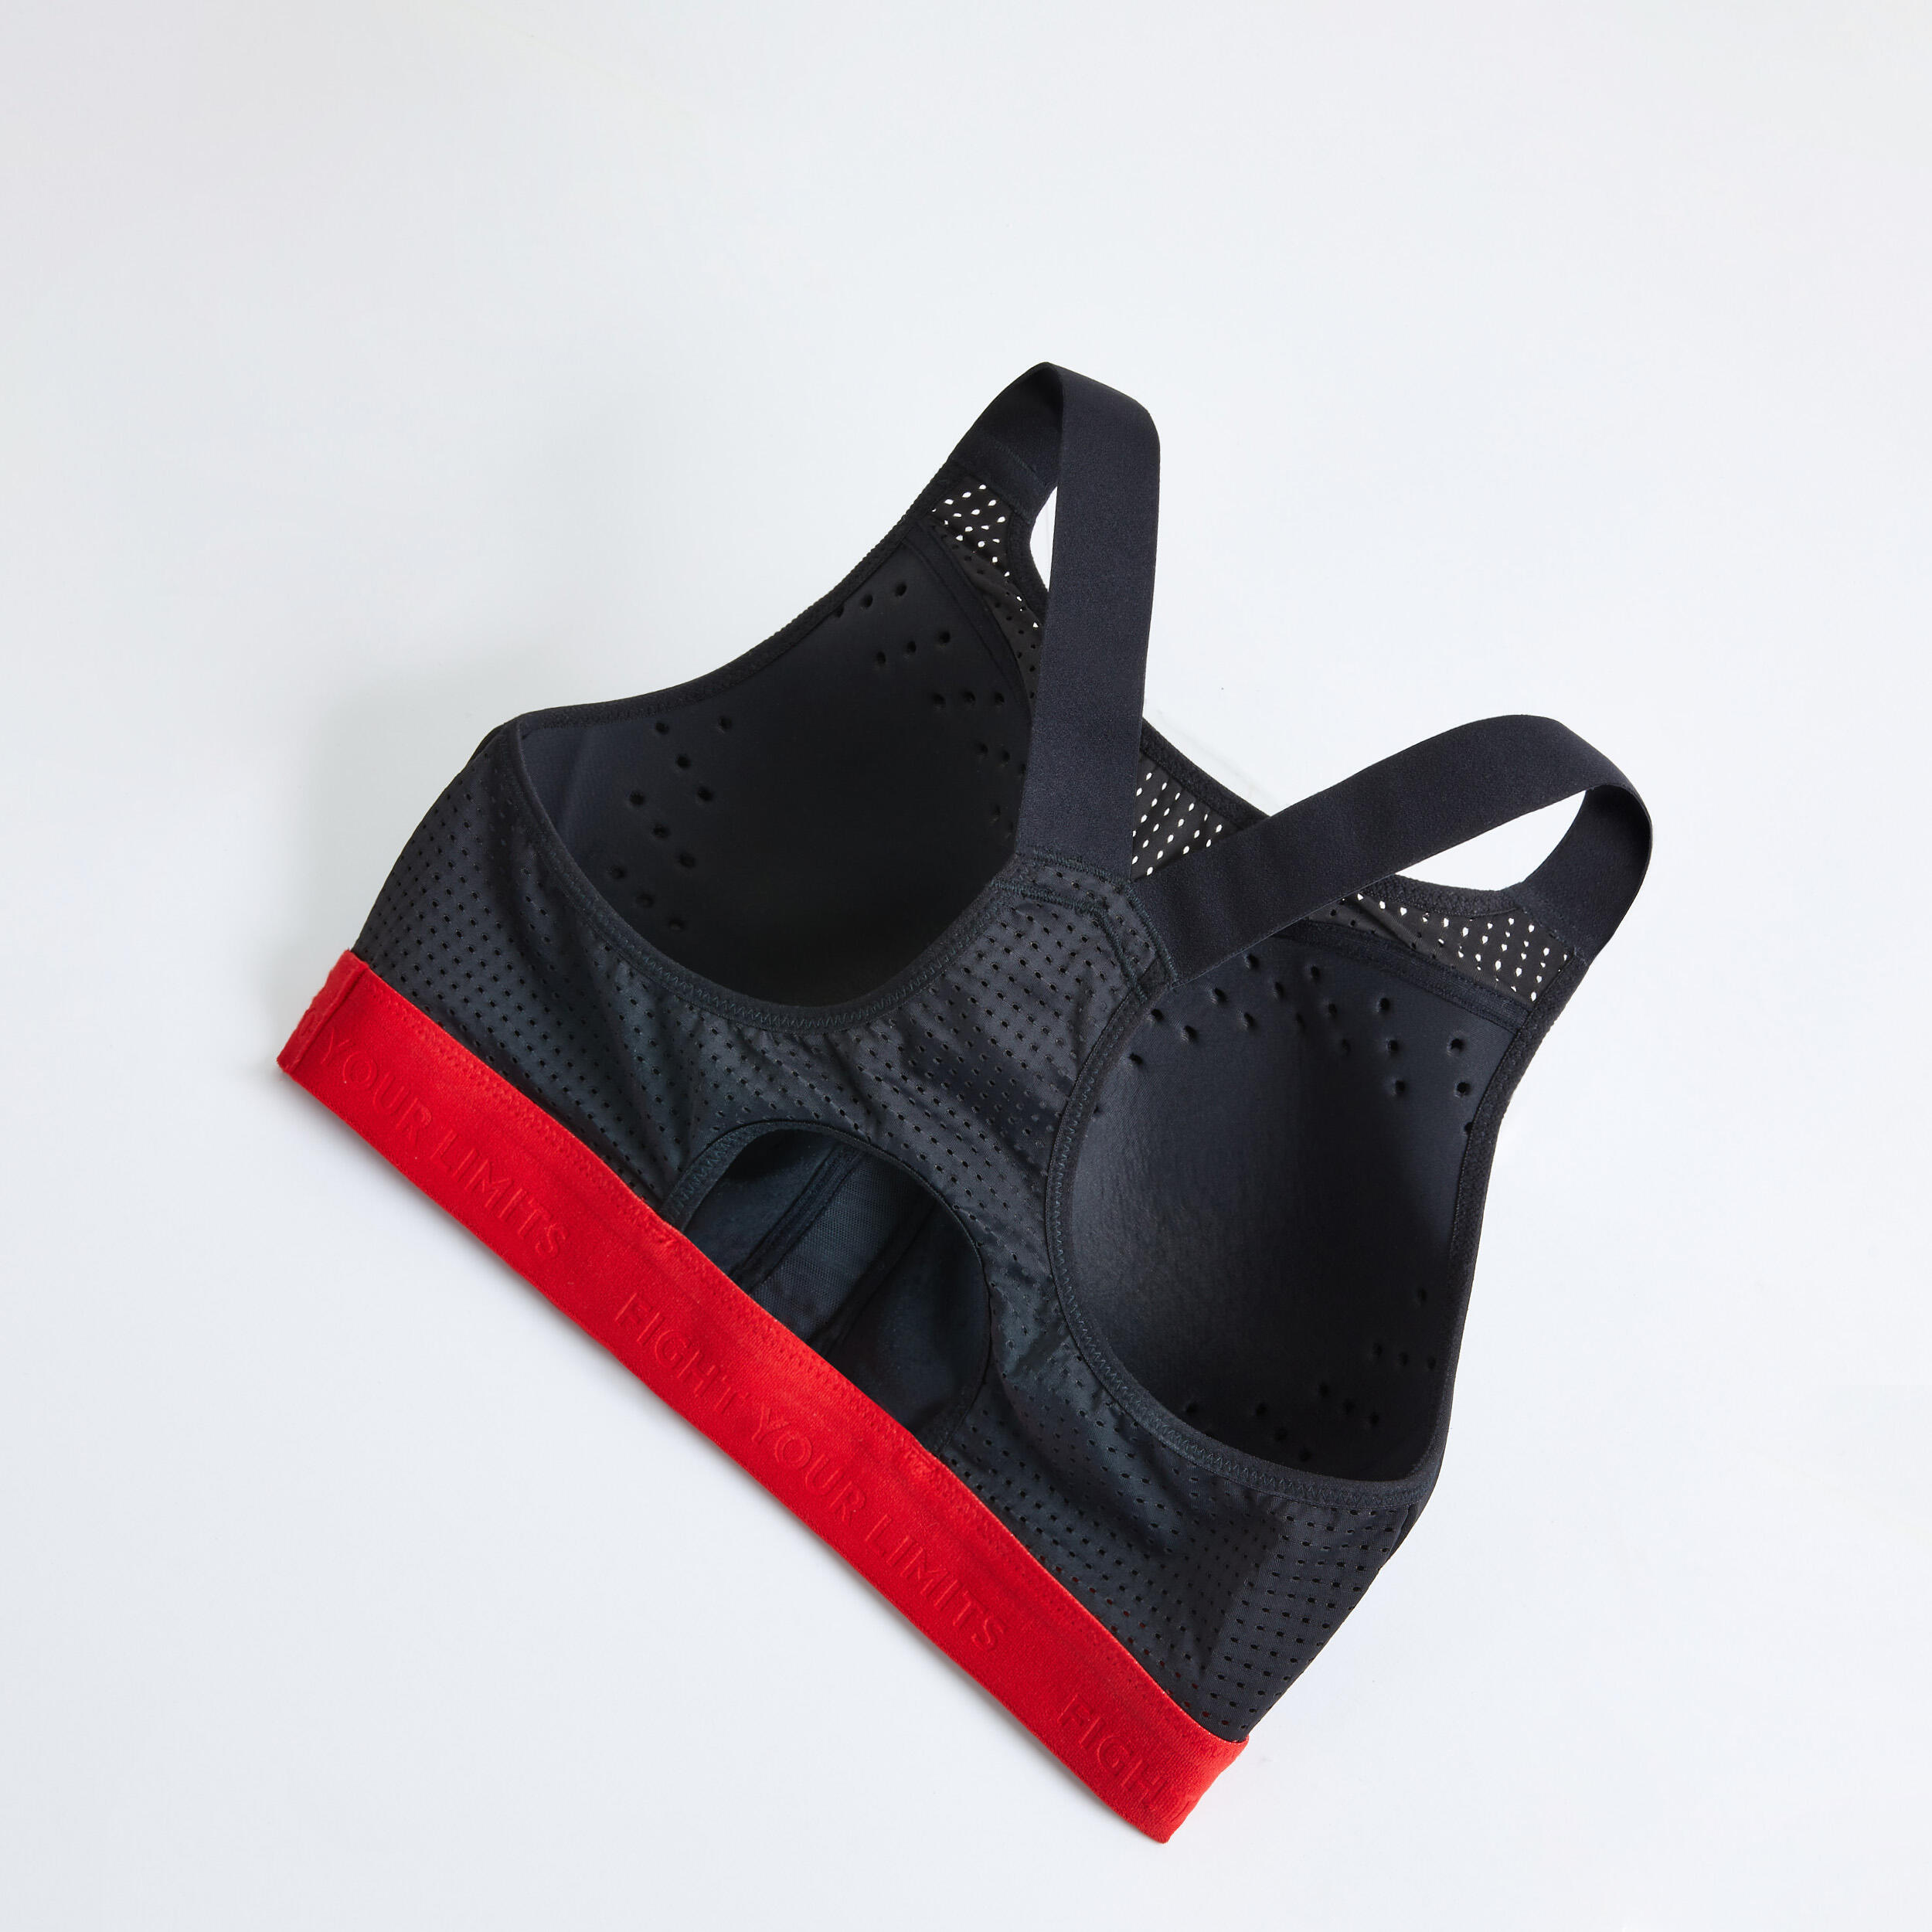 Boxing 2-In-1 Sports Bra: Support and Protection 4/6